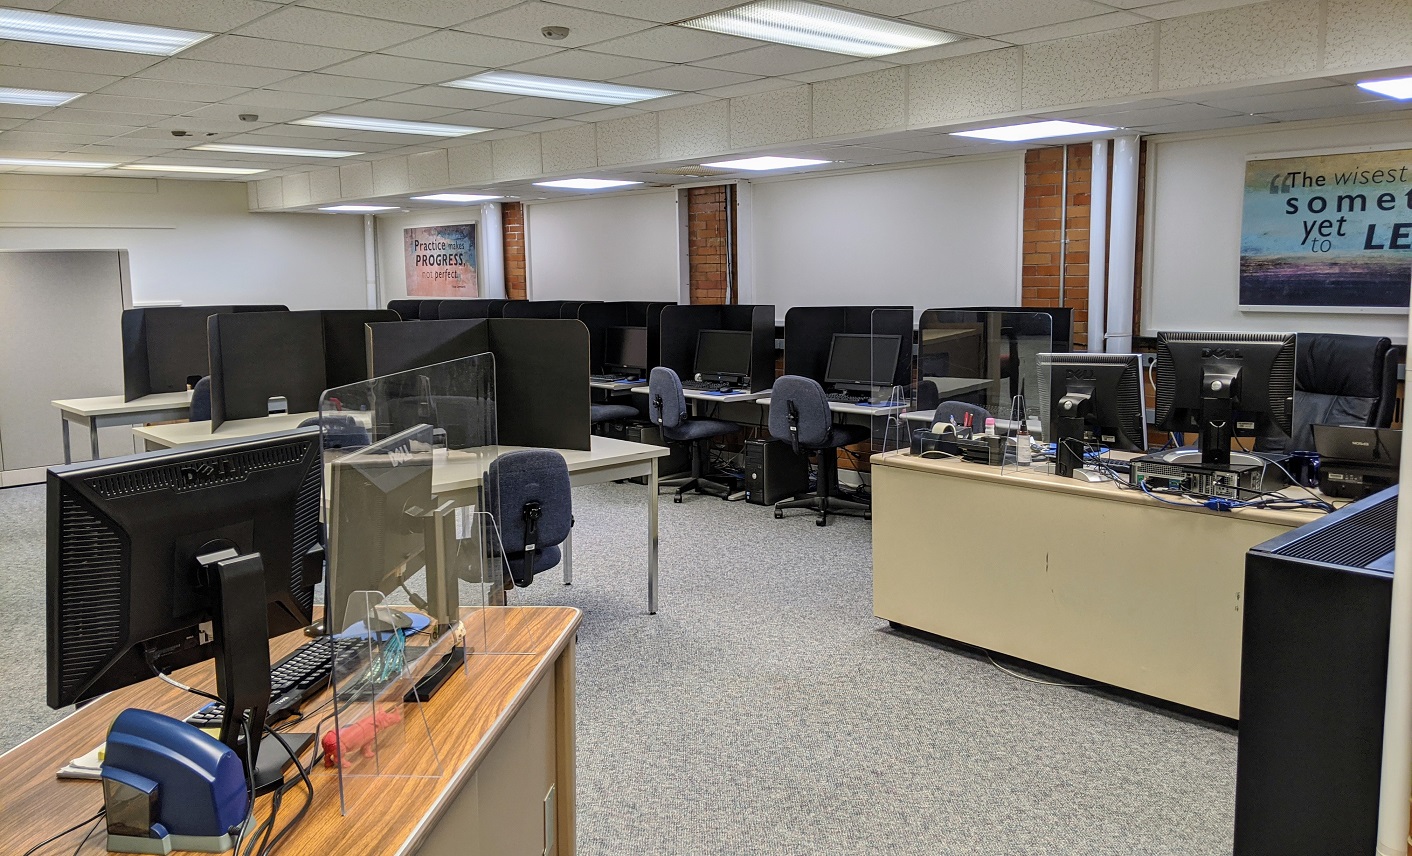 Image of the Testing Accommodation Center lab showing testing stations.